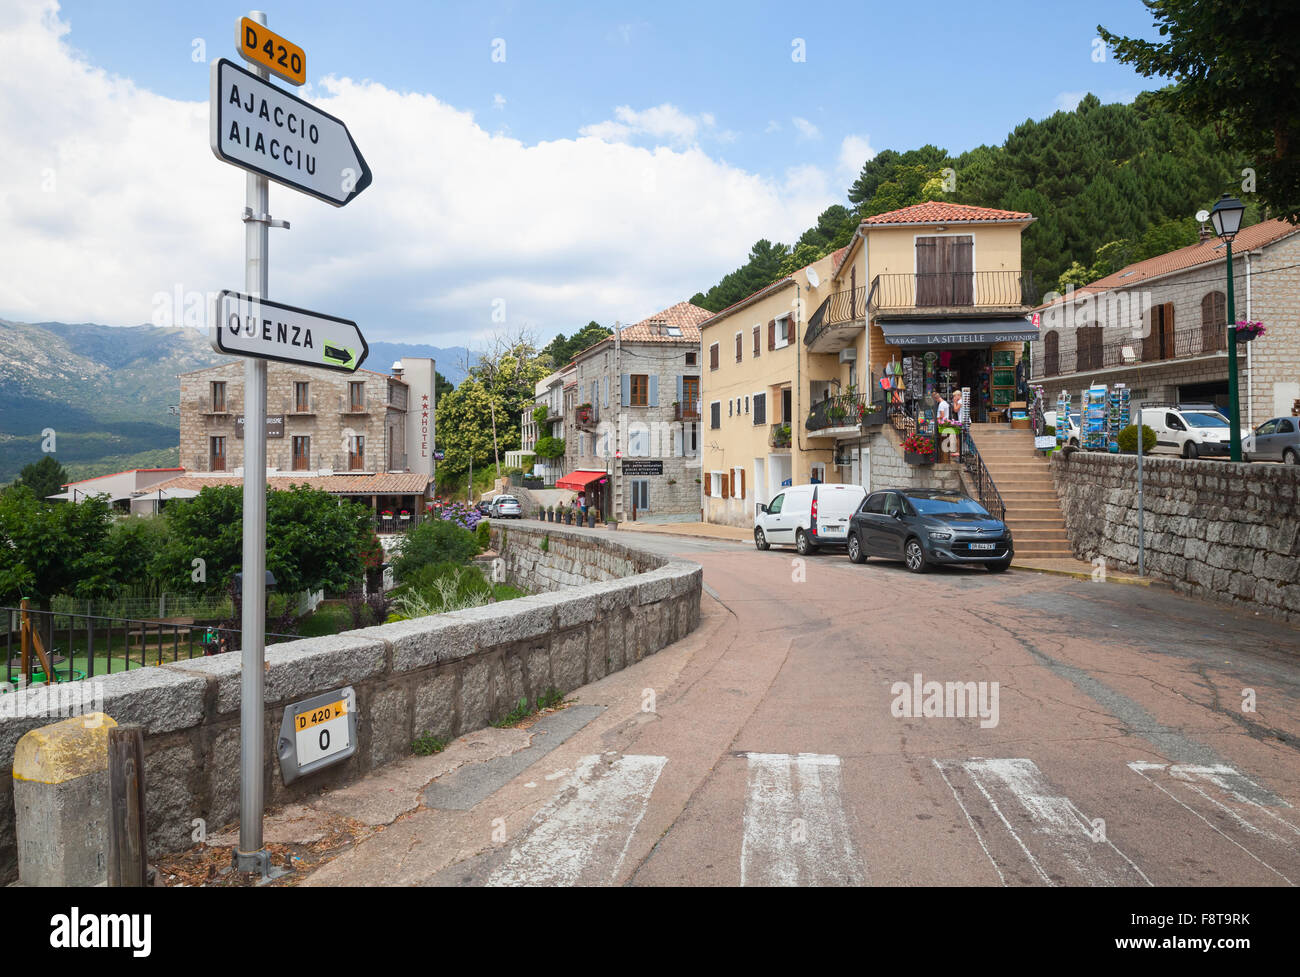 Zonza, France - July 1, 2015: Corsican village, old stone houses along the road. Zonza, South Corsica, France Stock Photo